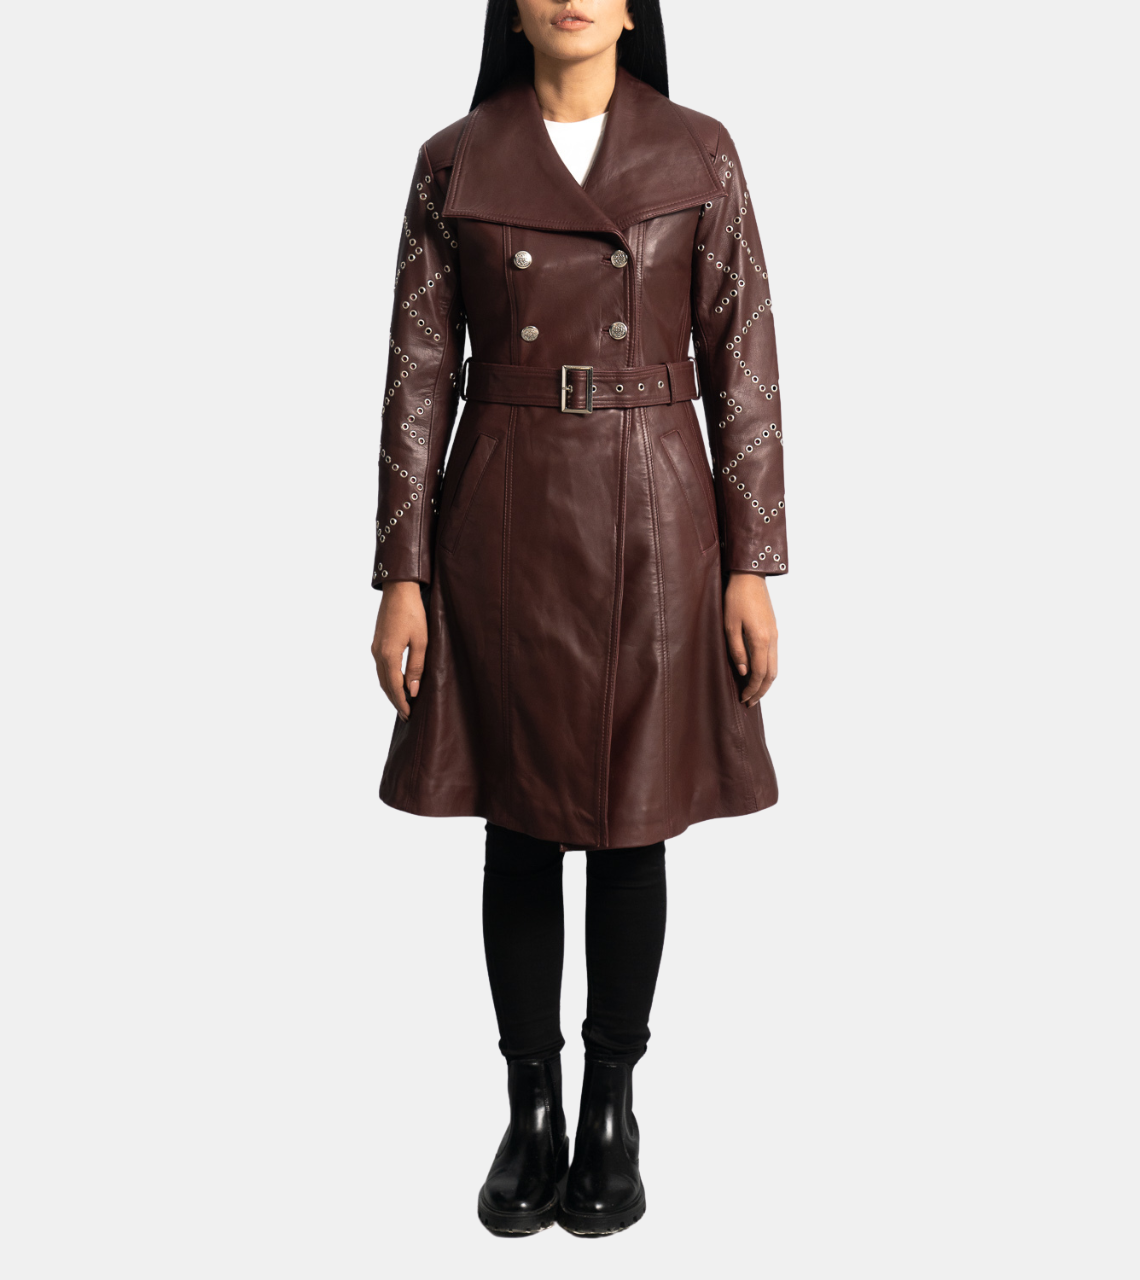  Women's Brown Leather Trench Coat 